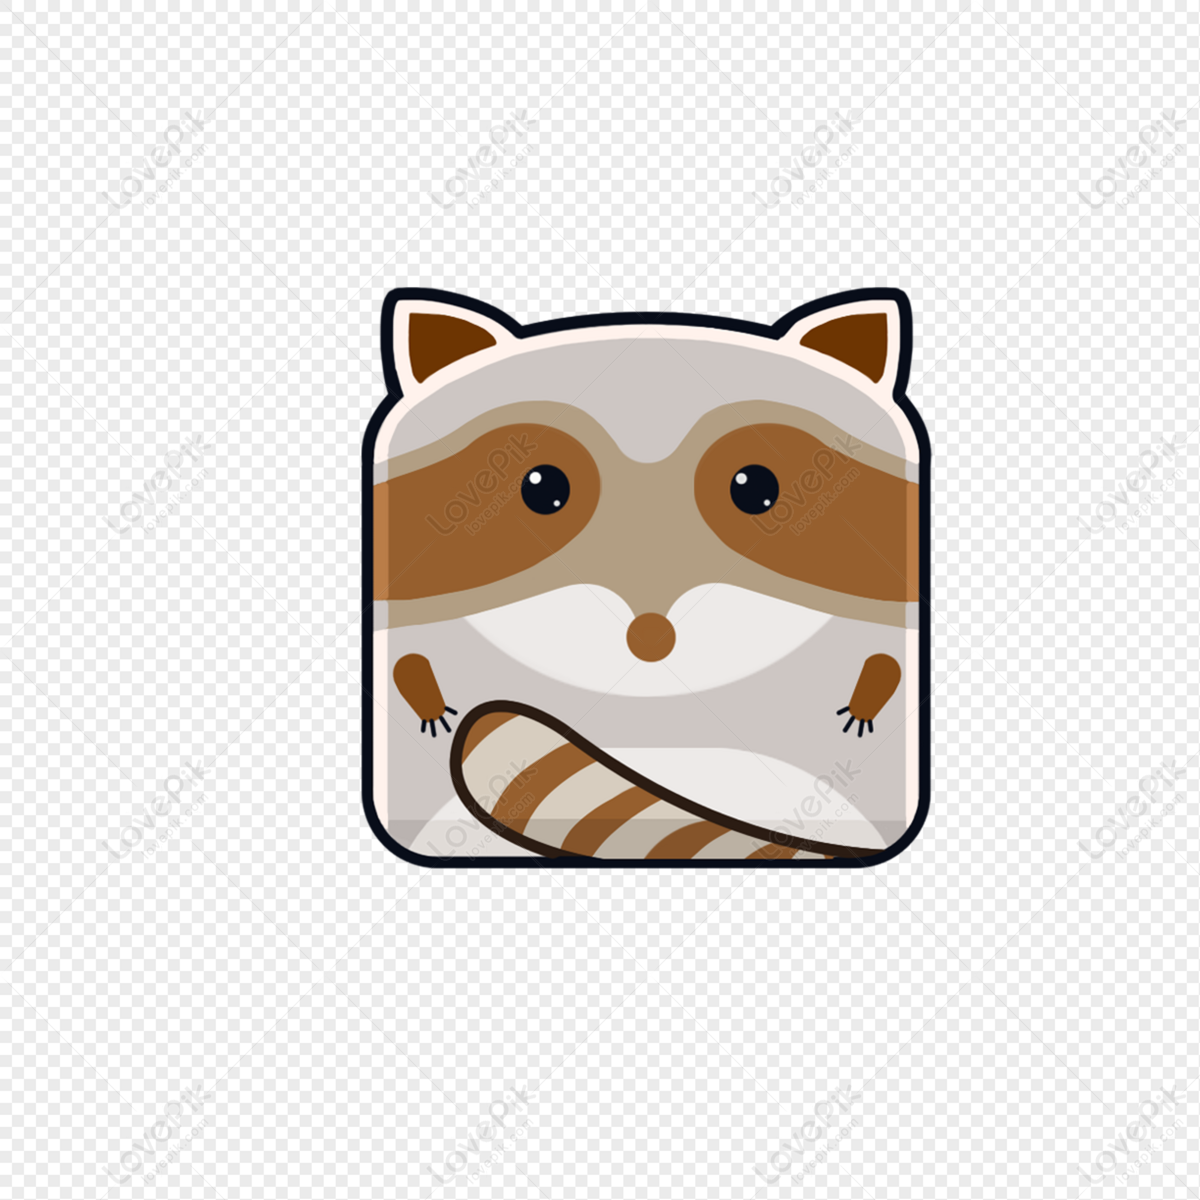 Cute Little Raccoon PNG White Transparent And Clipart Image For Free  Download - Lovepik | 401149802